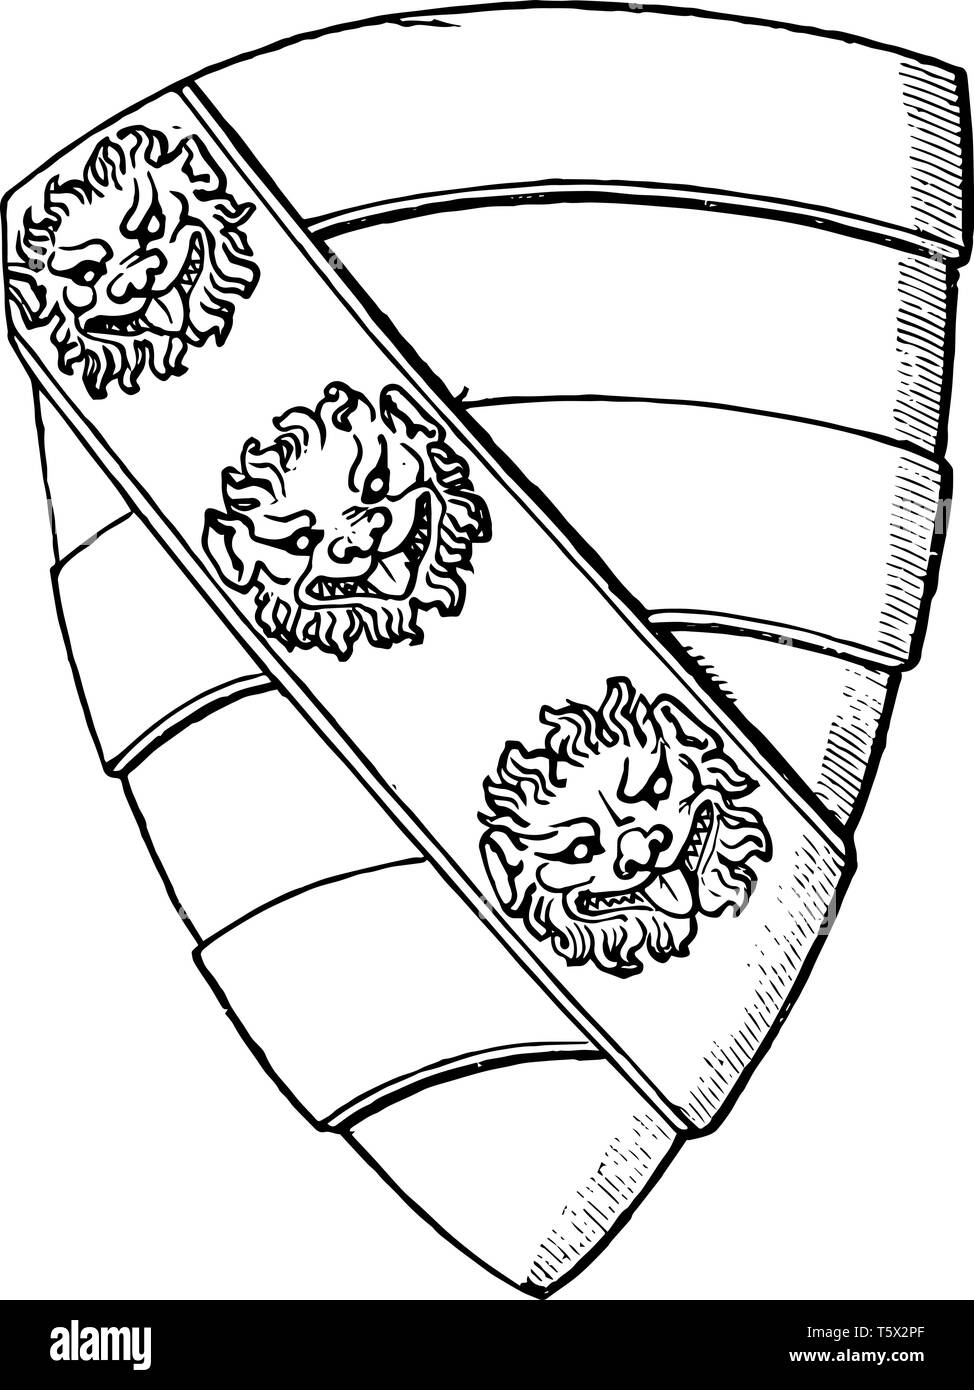 knight lion coloring pages